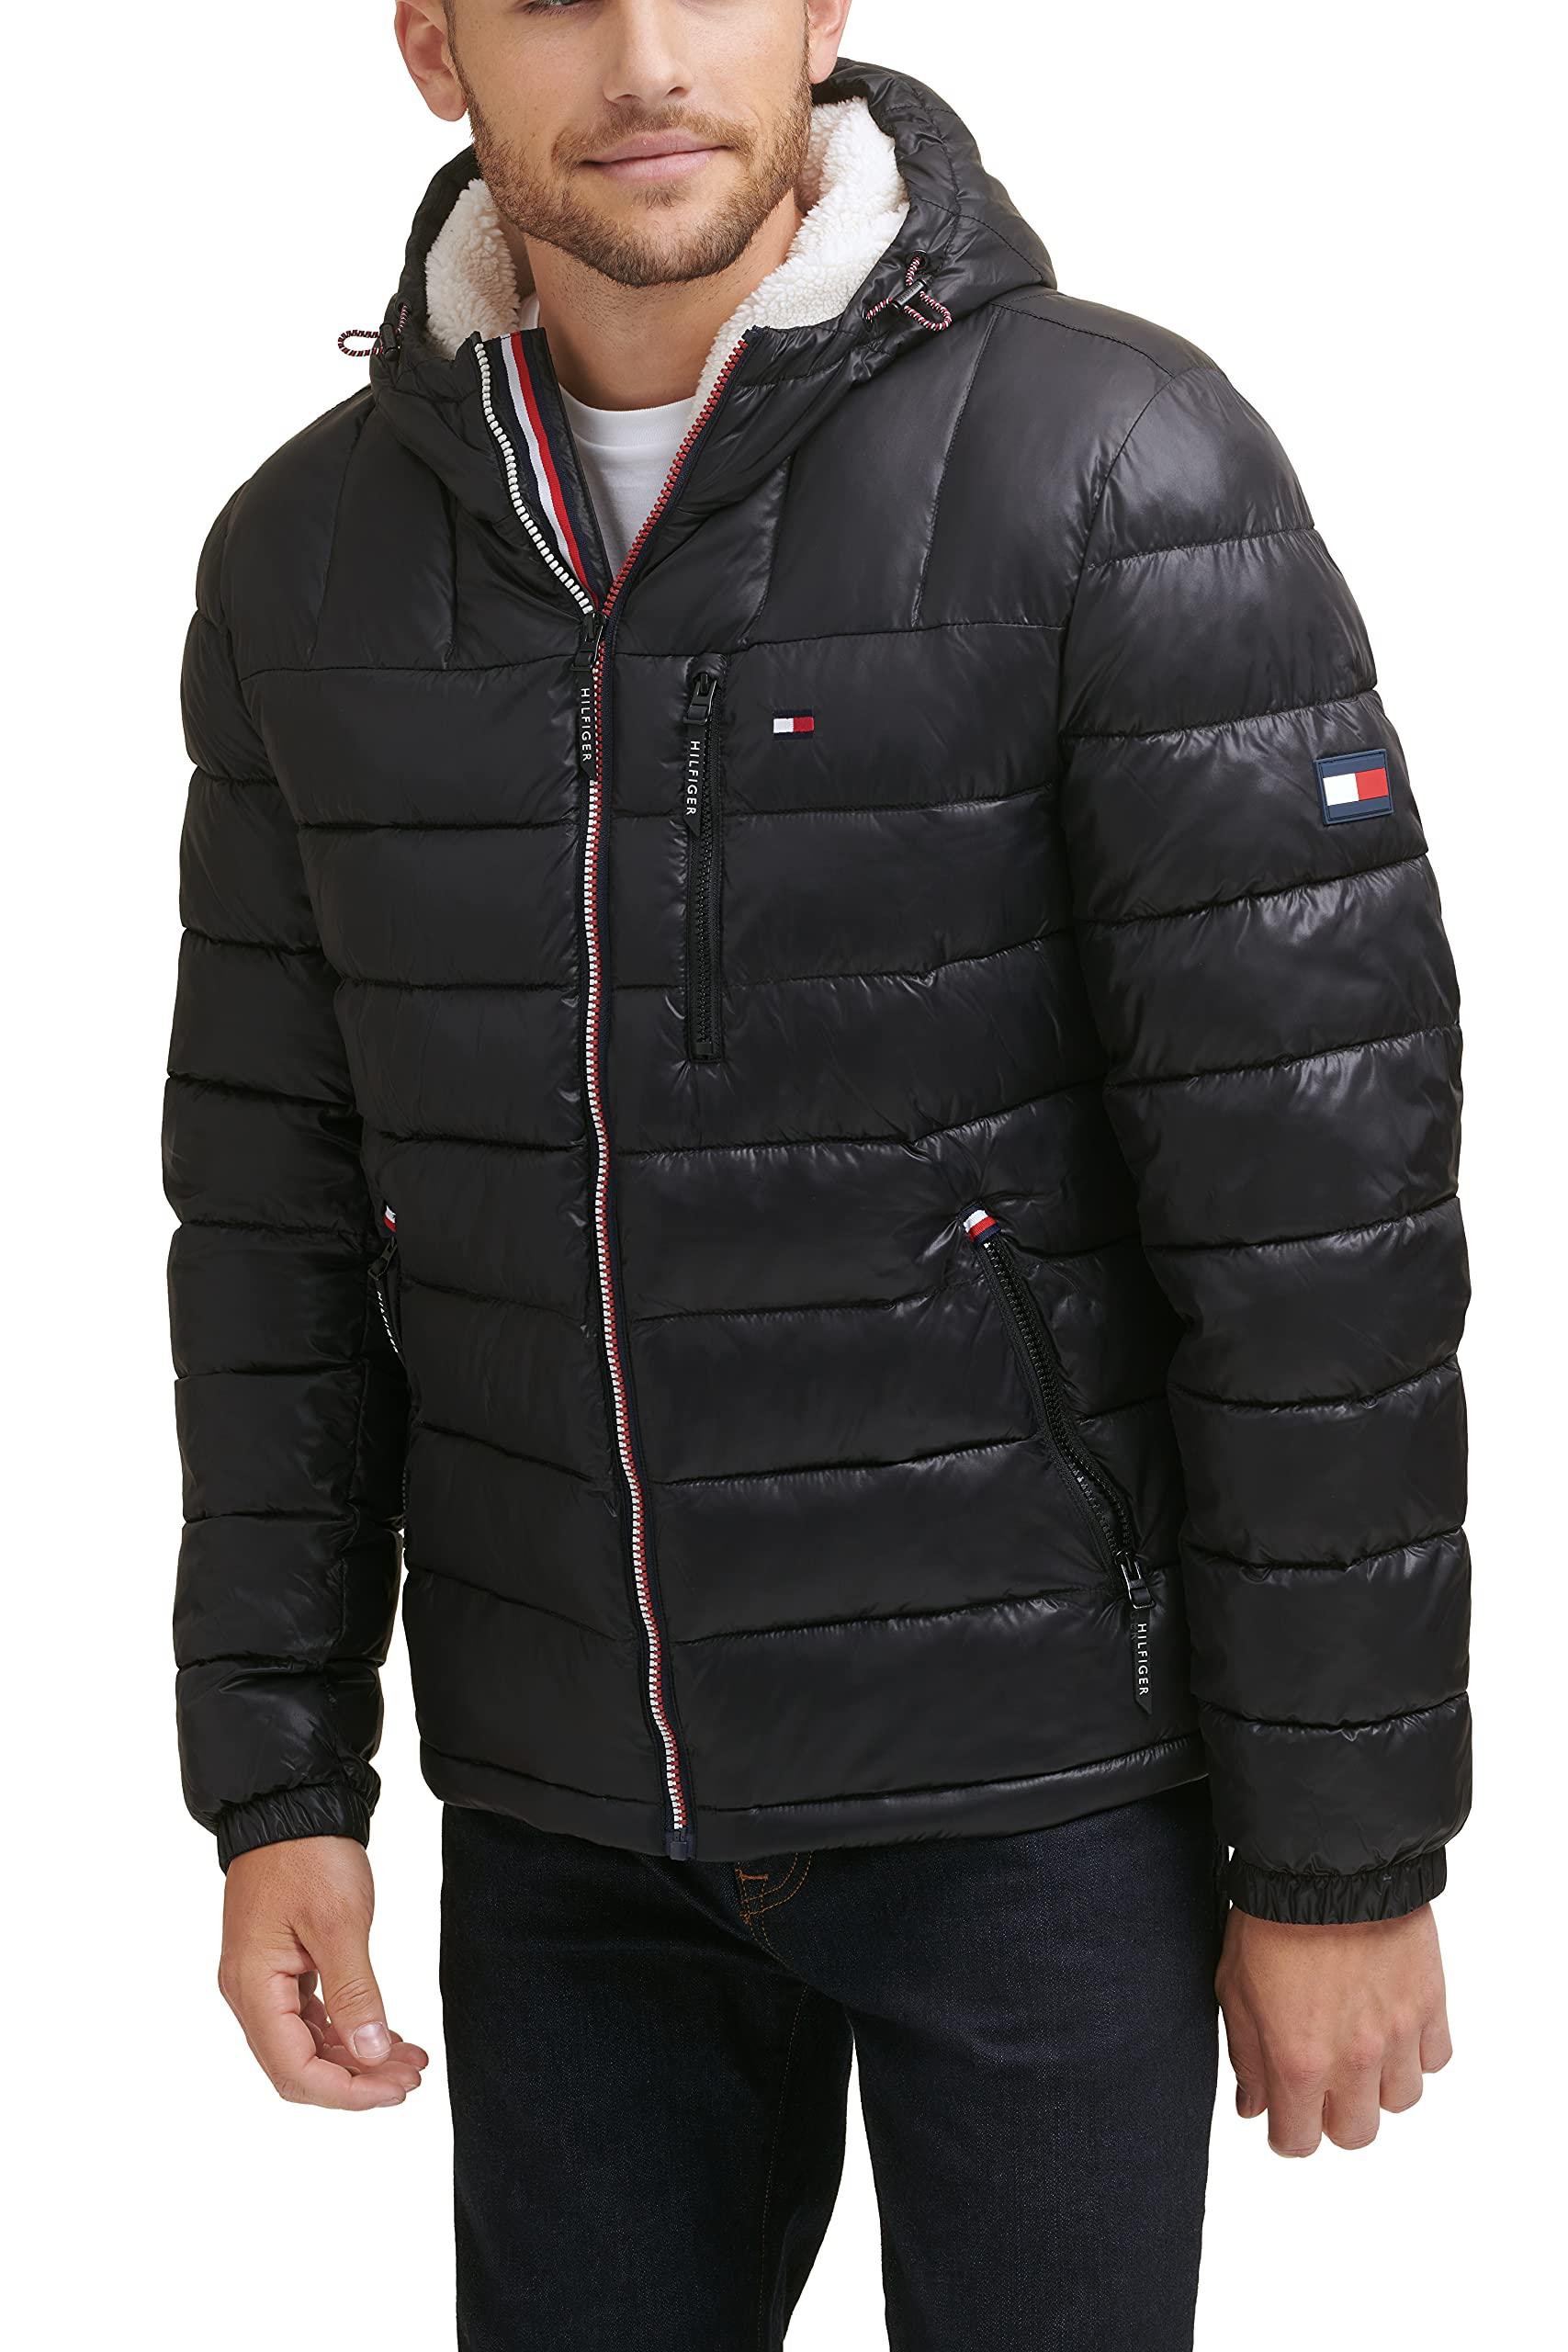 Tommy Hilfiger Rubber Sherpa Lined Hooded Water Resistant Jacket in Black for Men - Save 23% - Lyst